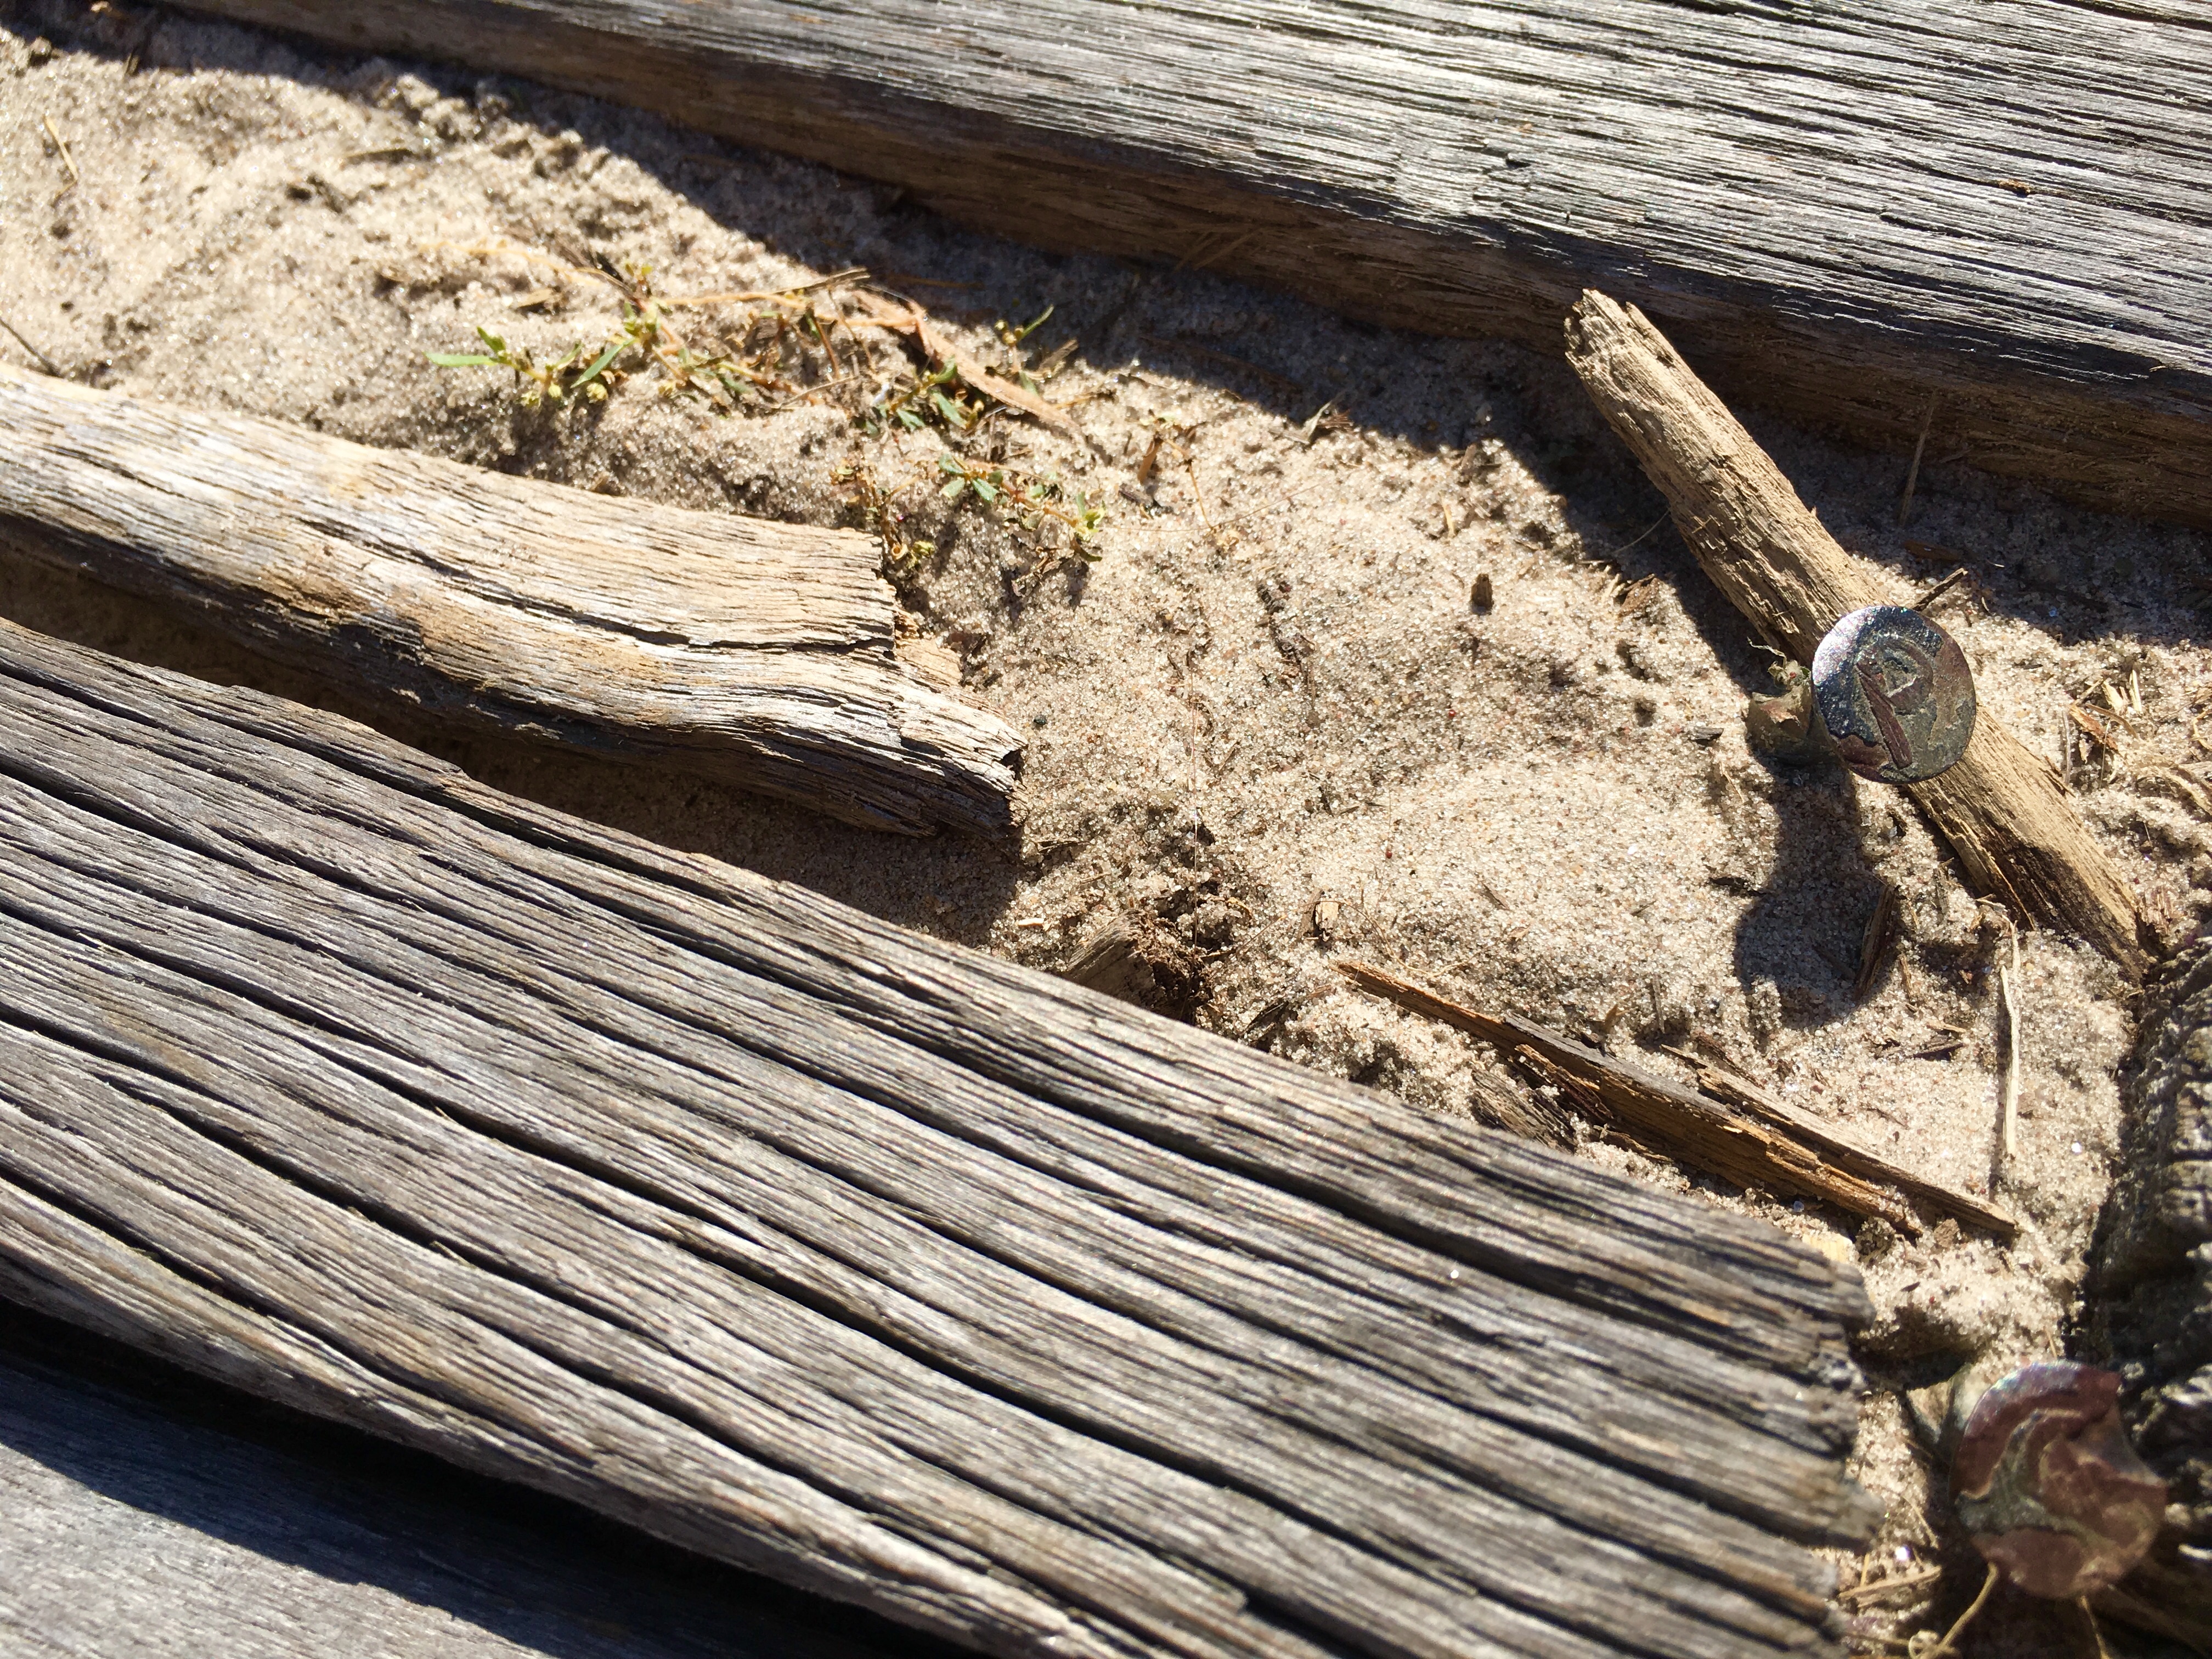 There are exposed nails on the Boardwalk near the Coney Island Aquarium. Eagle photo by Lore Croghan